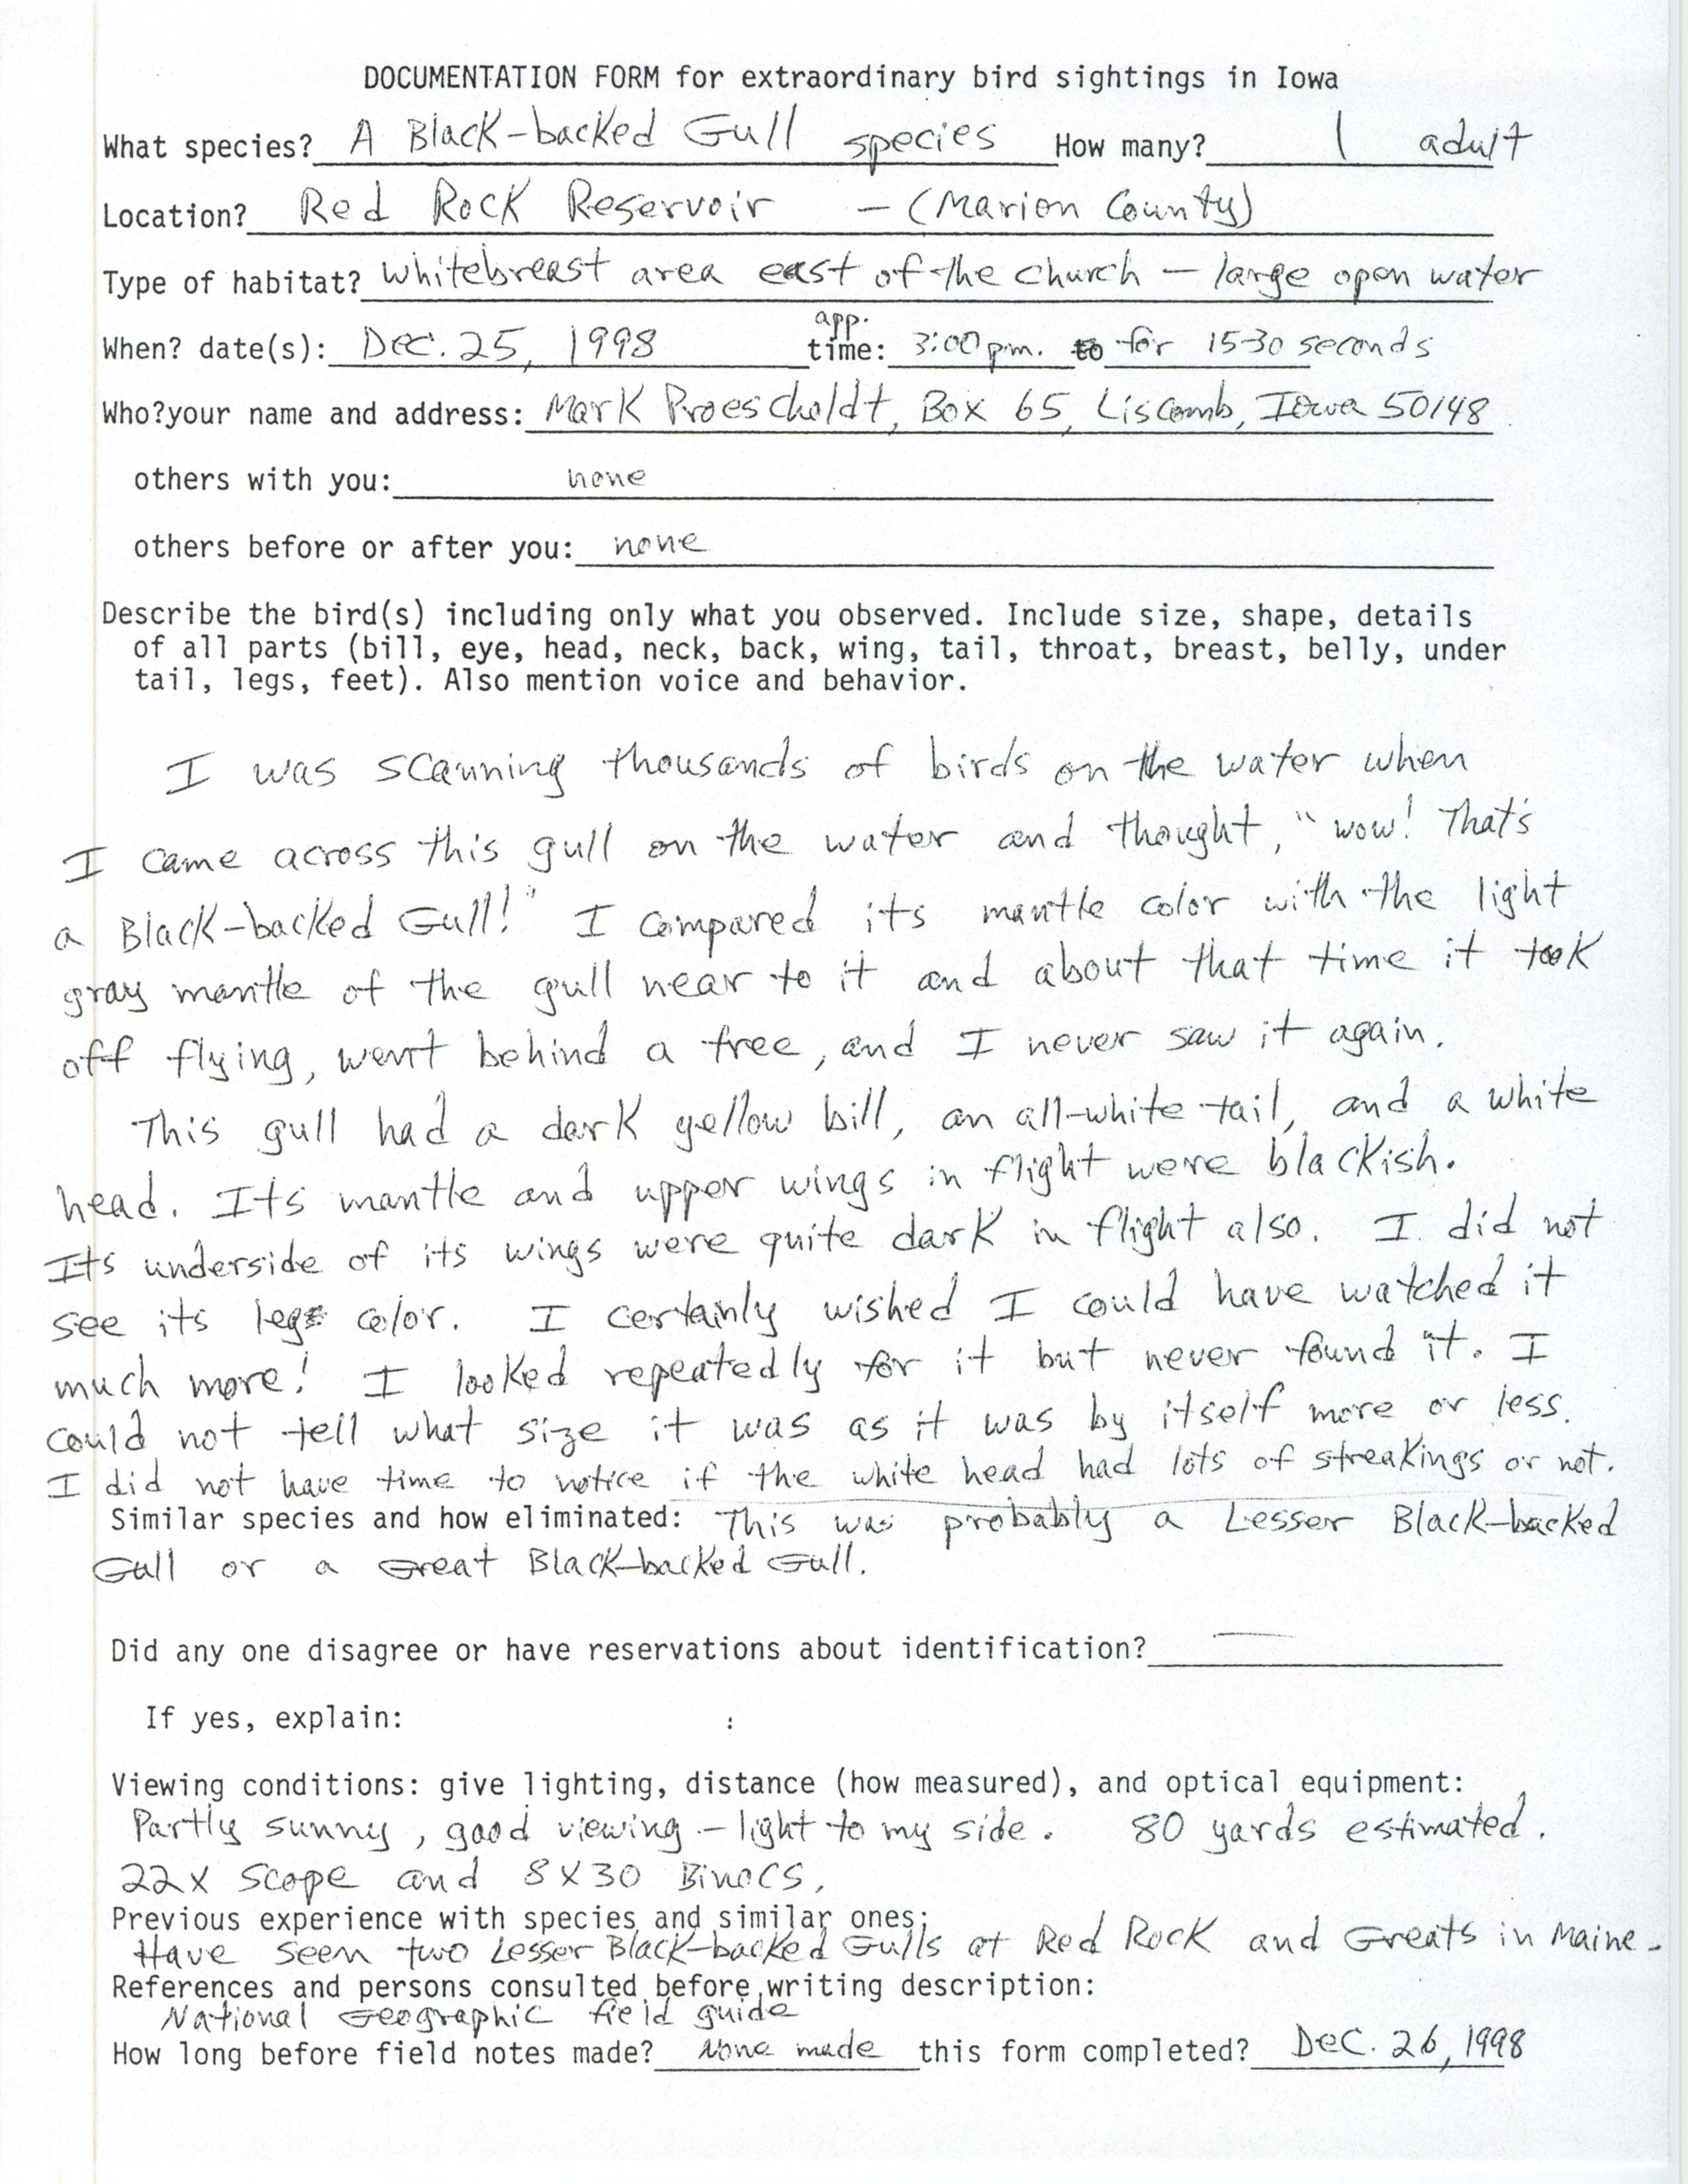 Rare bird documentation form for Black-backed Gull species at Red Rock Reservoir, 1998